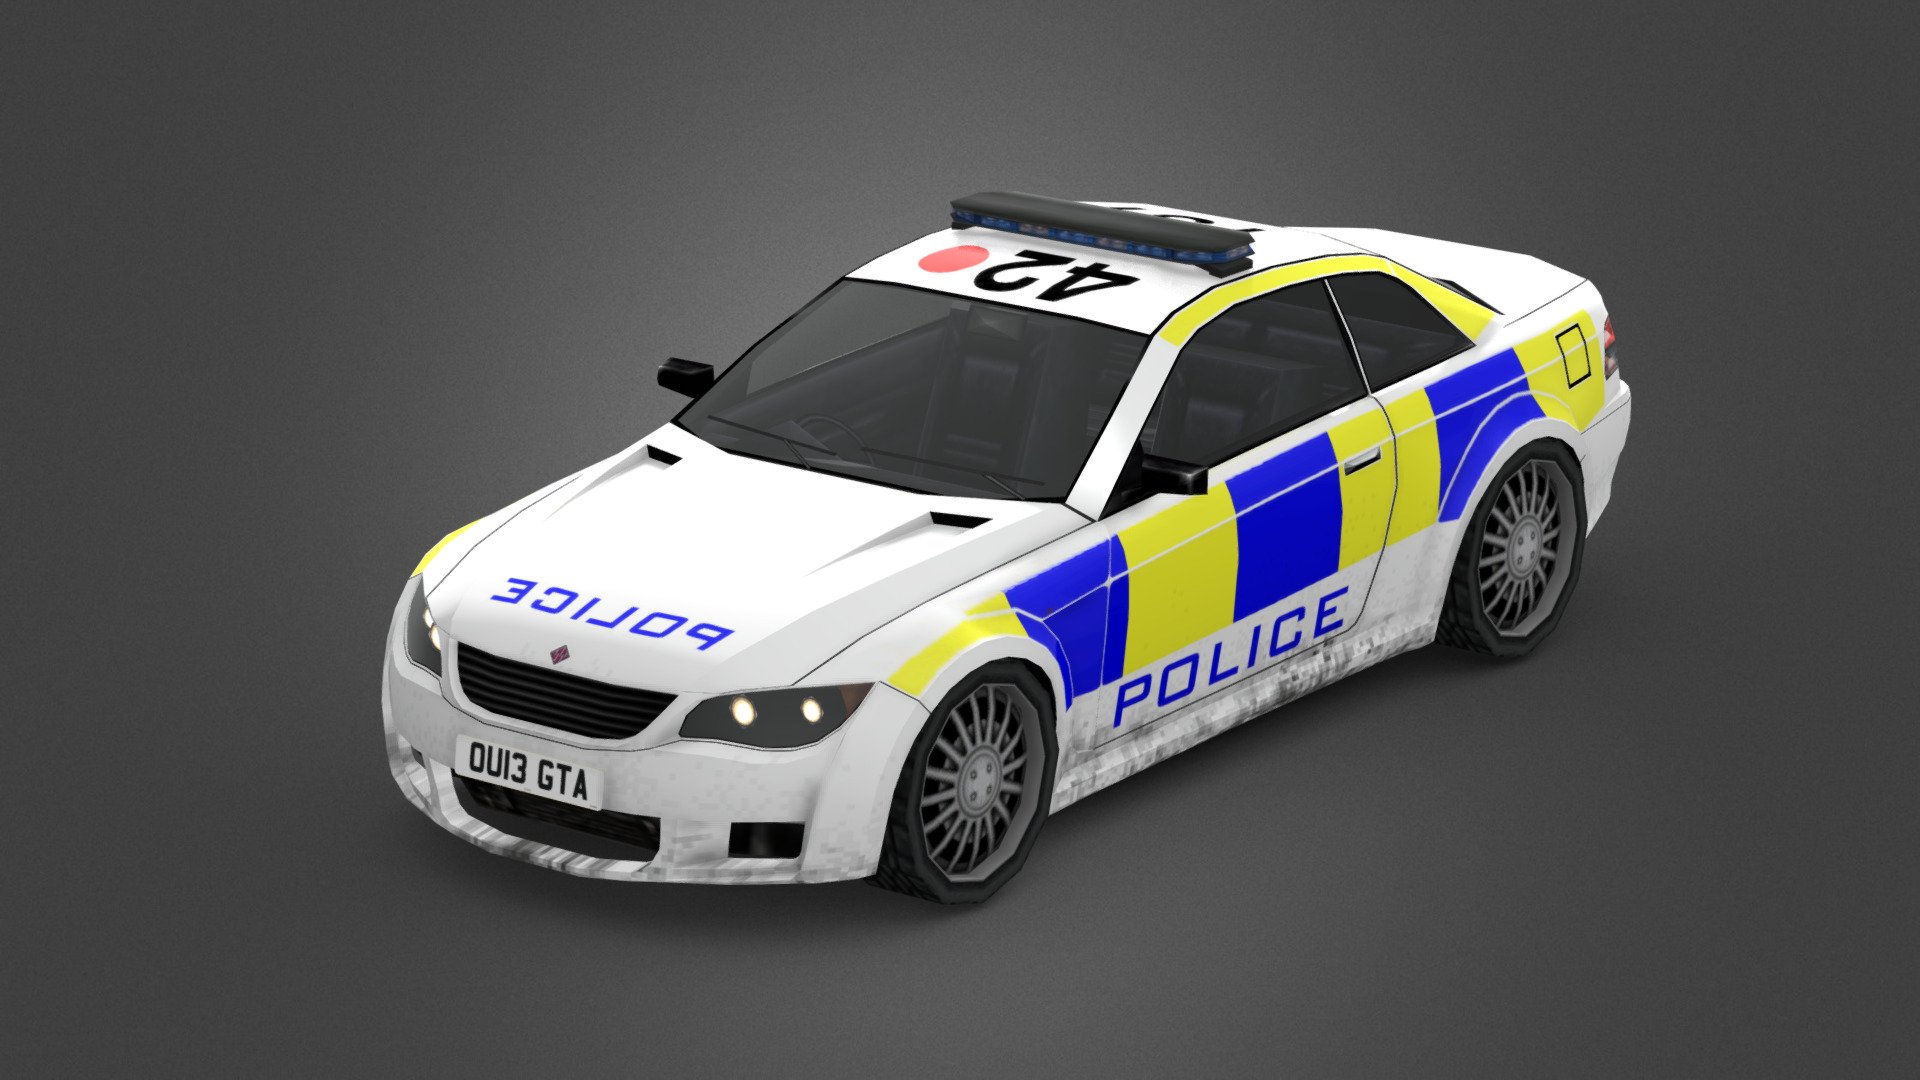 Ubermacht Sentinel XS from GTA V remodelled to fit the style of GTA SA using Blender and Photoshop.
Modified to a British police car with livery, right-hand-drive and UK style lightbar 3d model